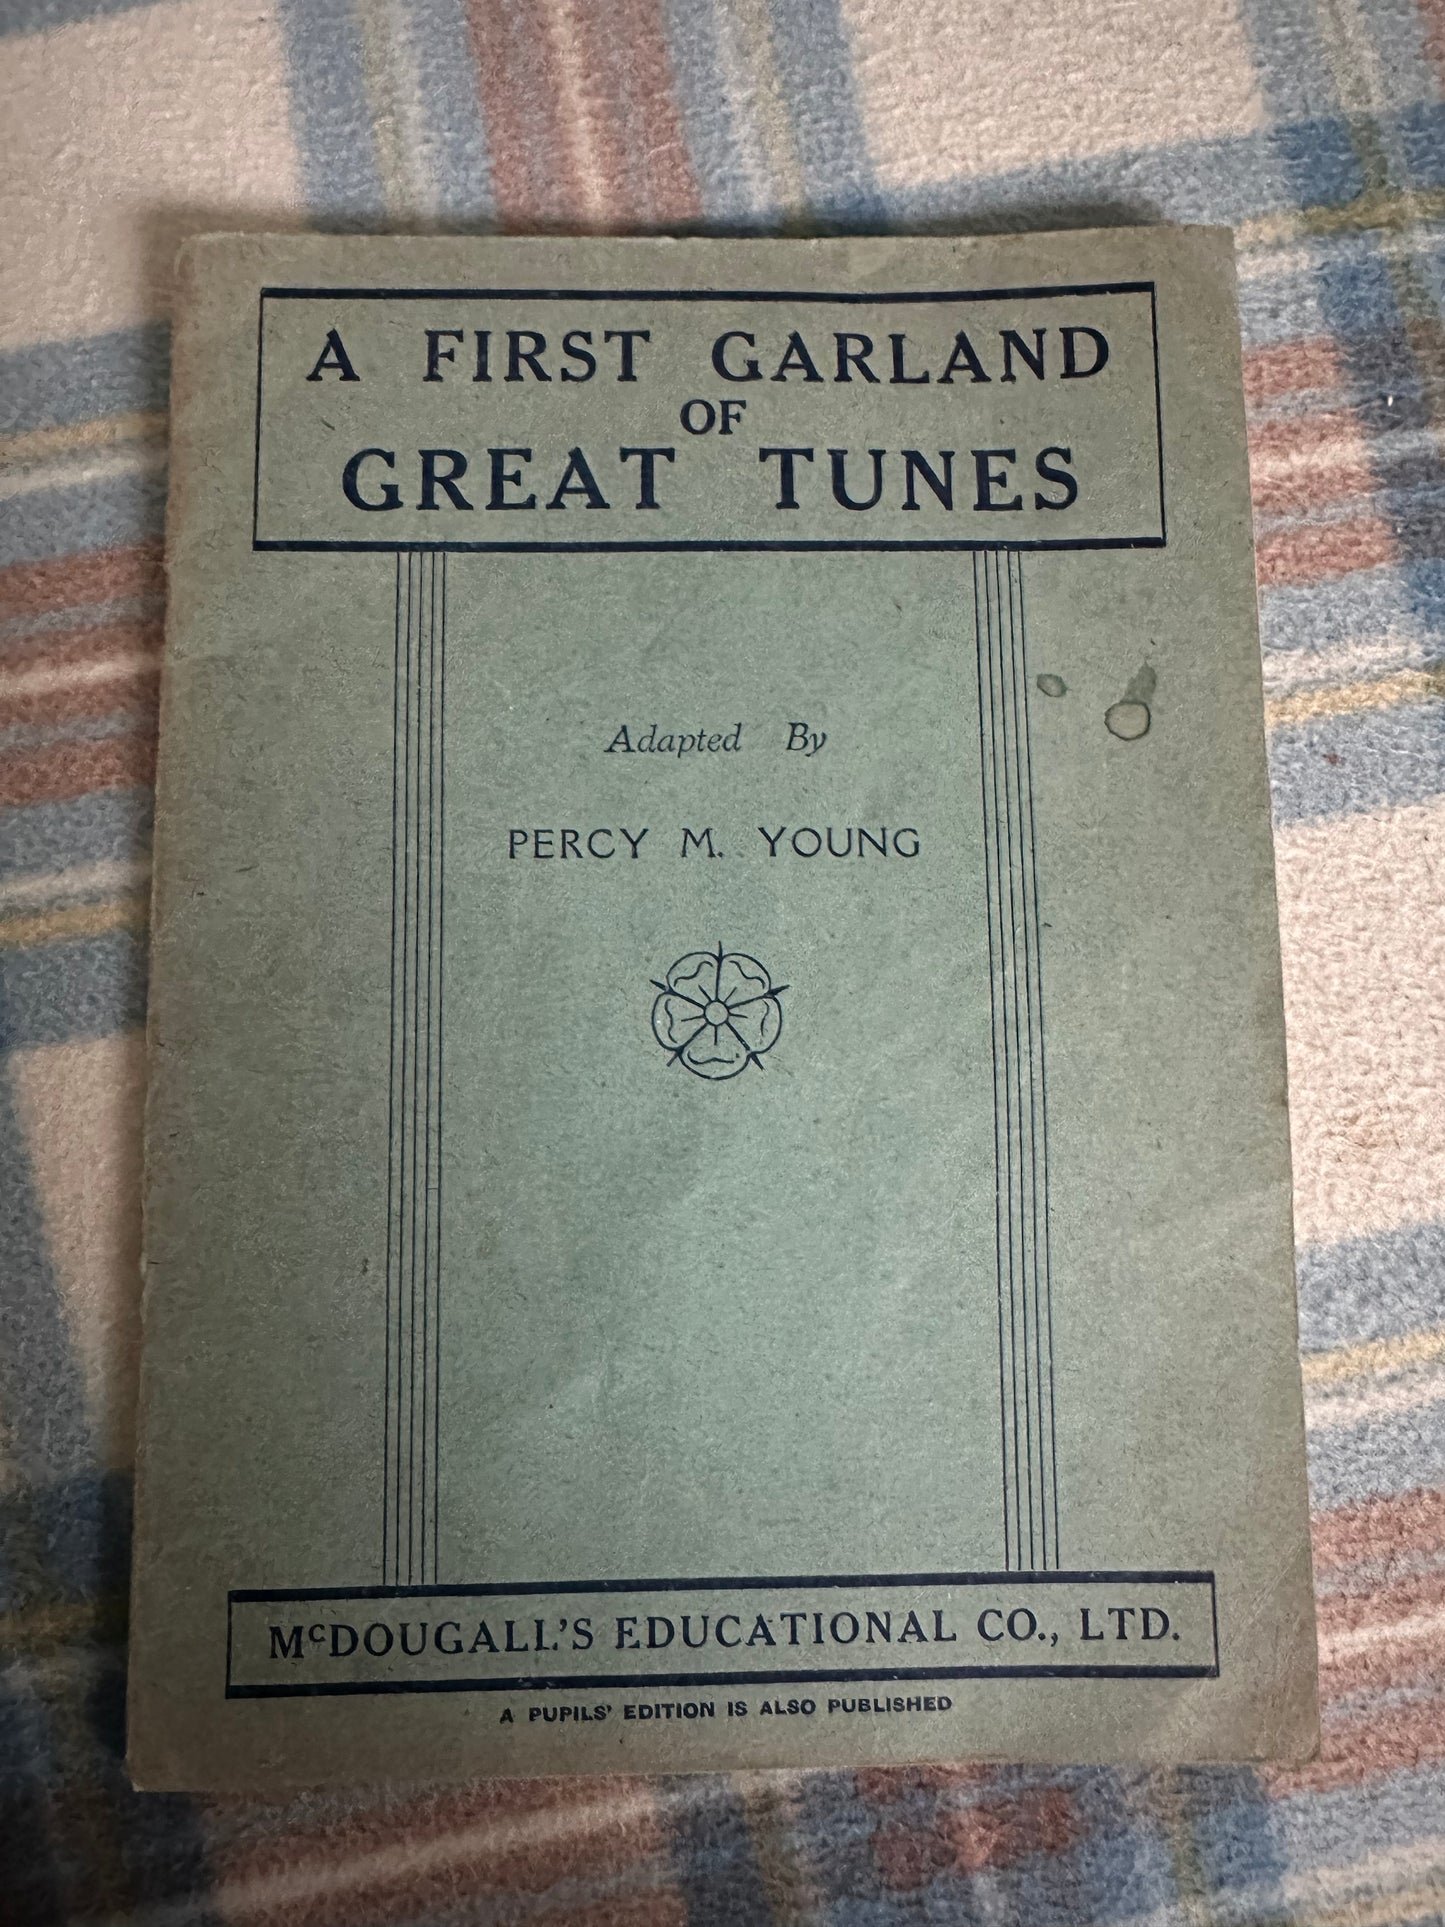 1920’s A First Garland Of Great Tunes - Percy M. Young(McDougall’s Educational Co Ltd)